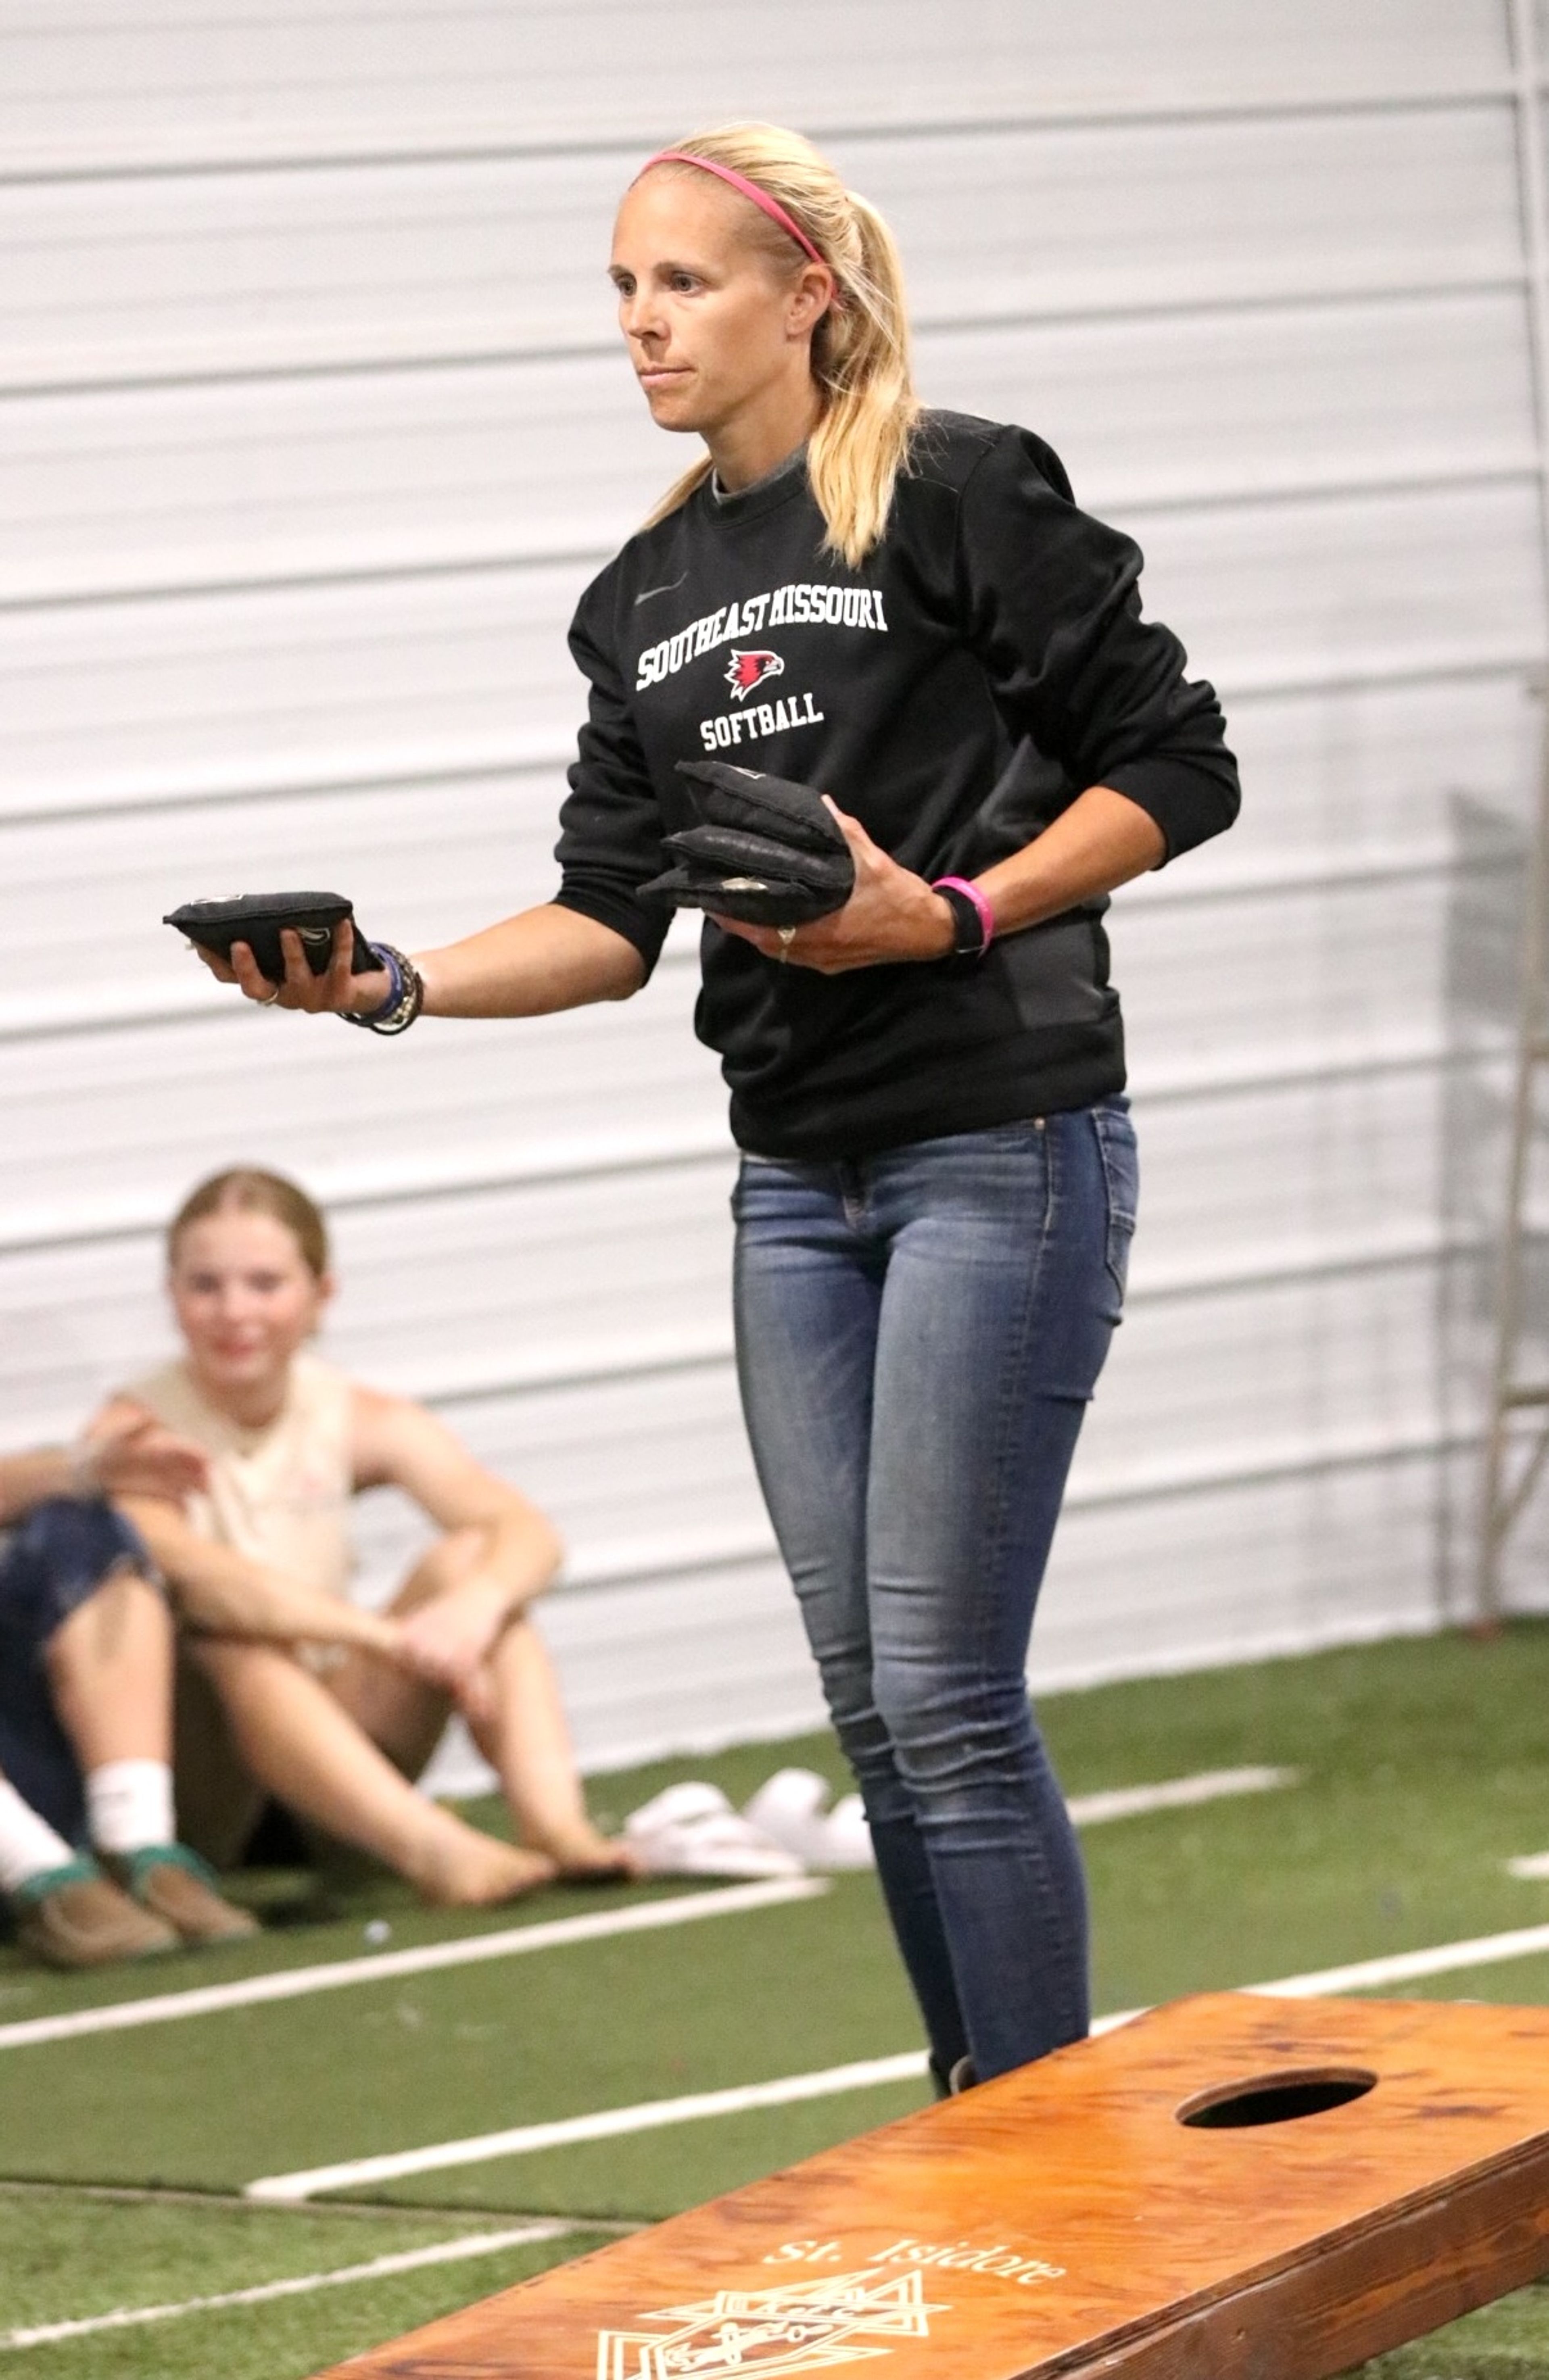 
Holly Hoesli prepares to throw a corn bag during the corn hole competition inside the KC multipurpose building.